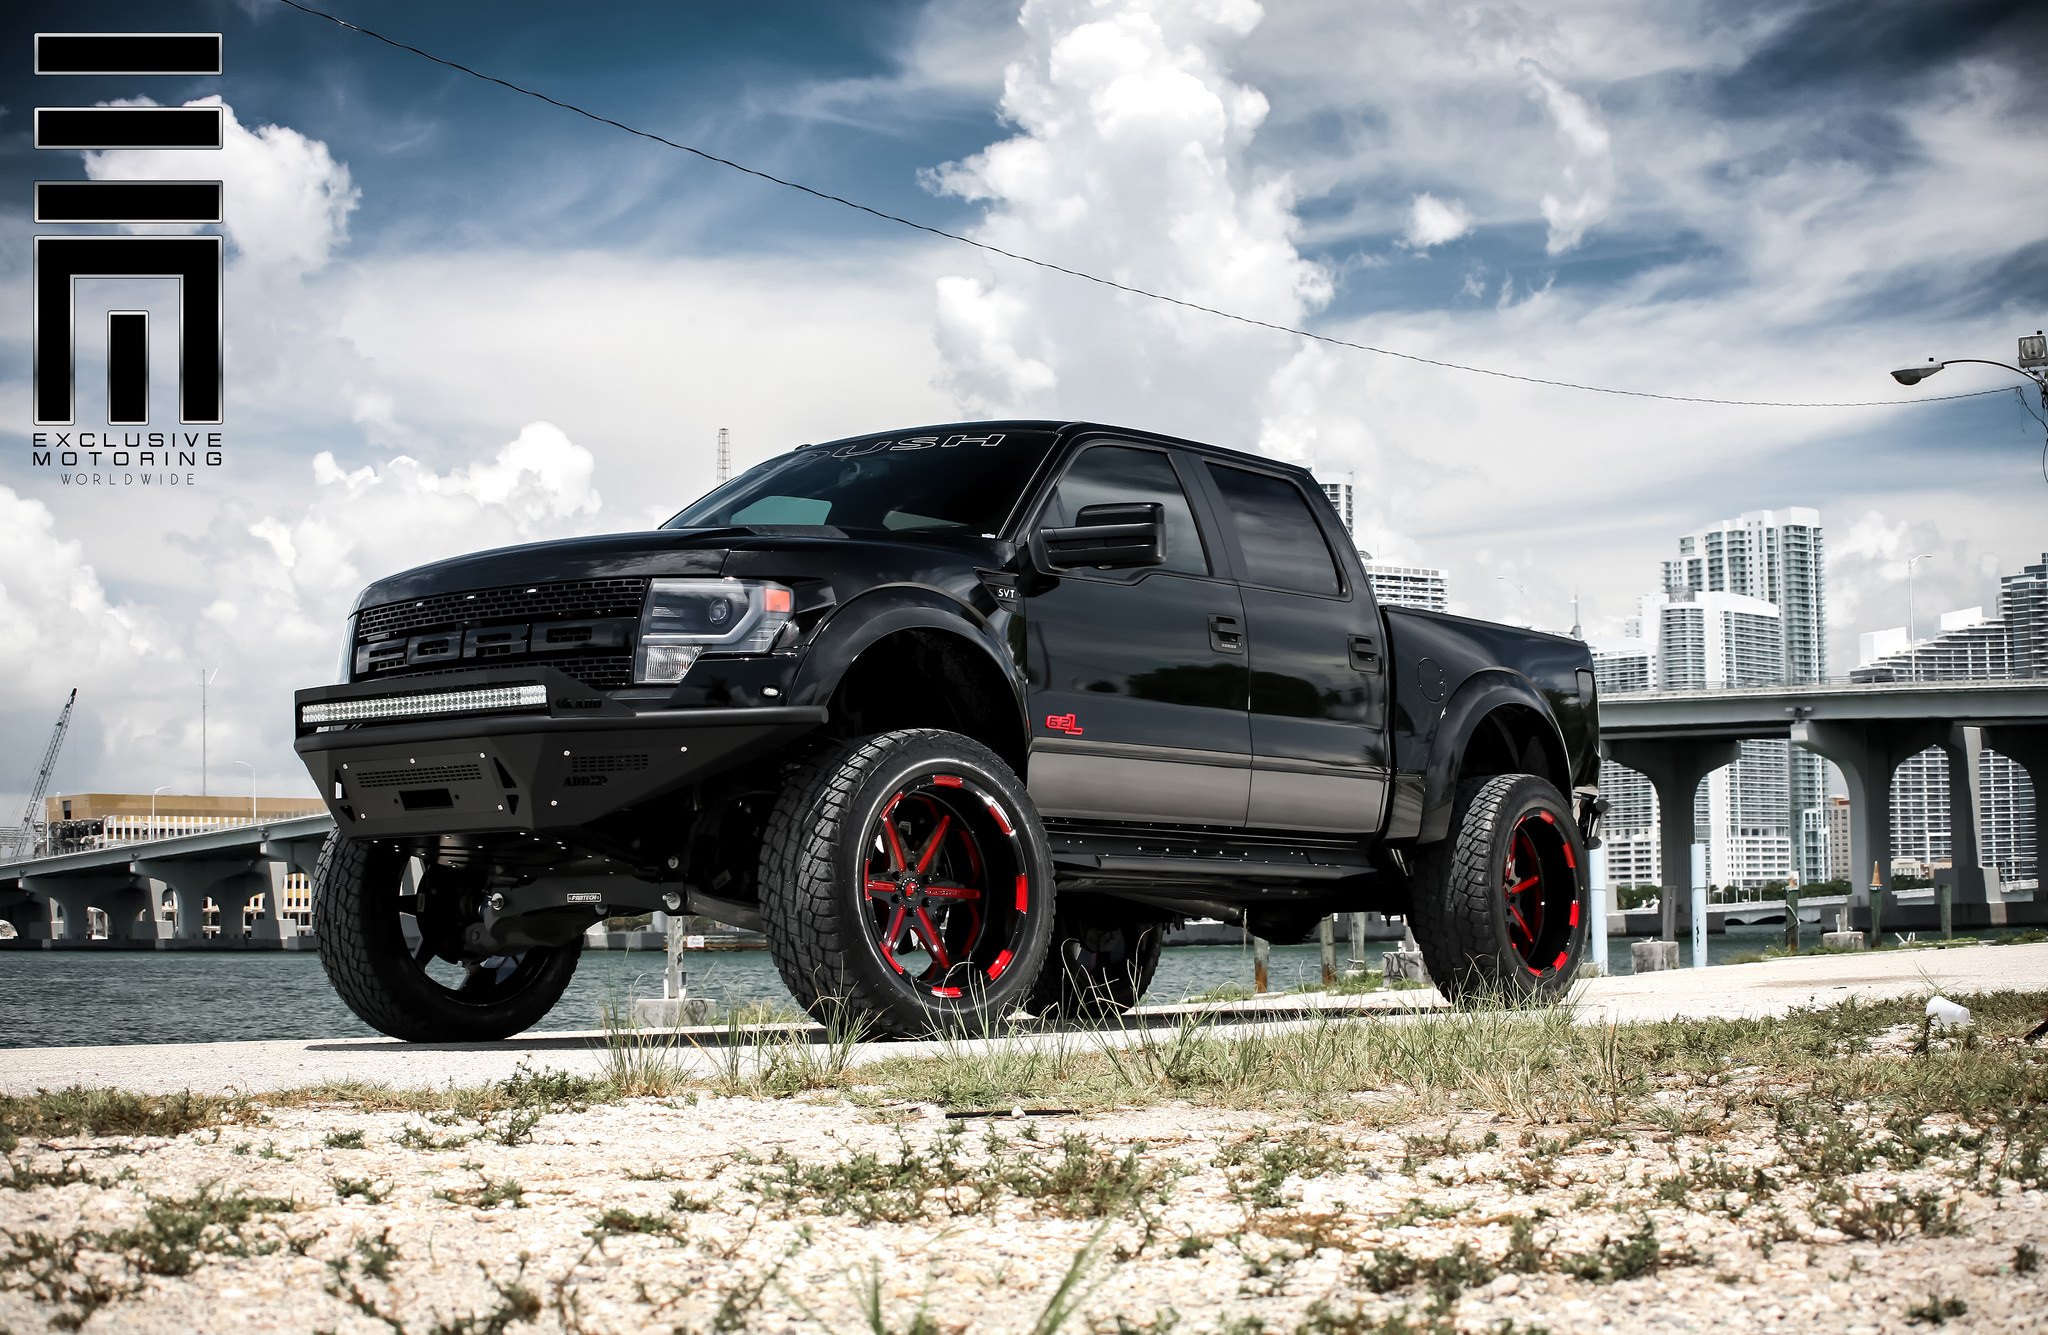 Roush F150 Raptor with a Lift and Forgiato Rims - Photo by Exclusive Motoring